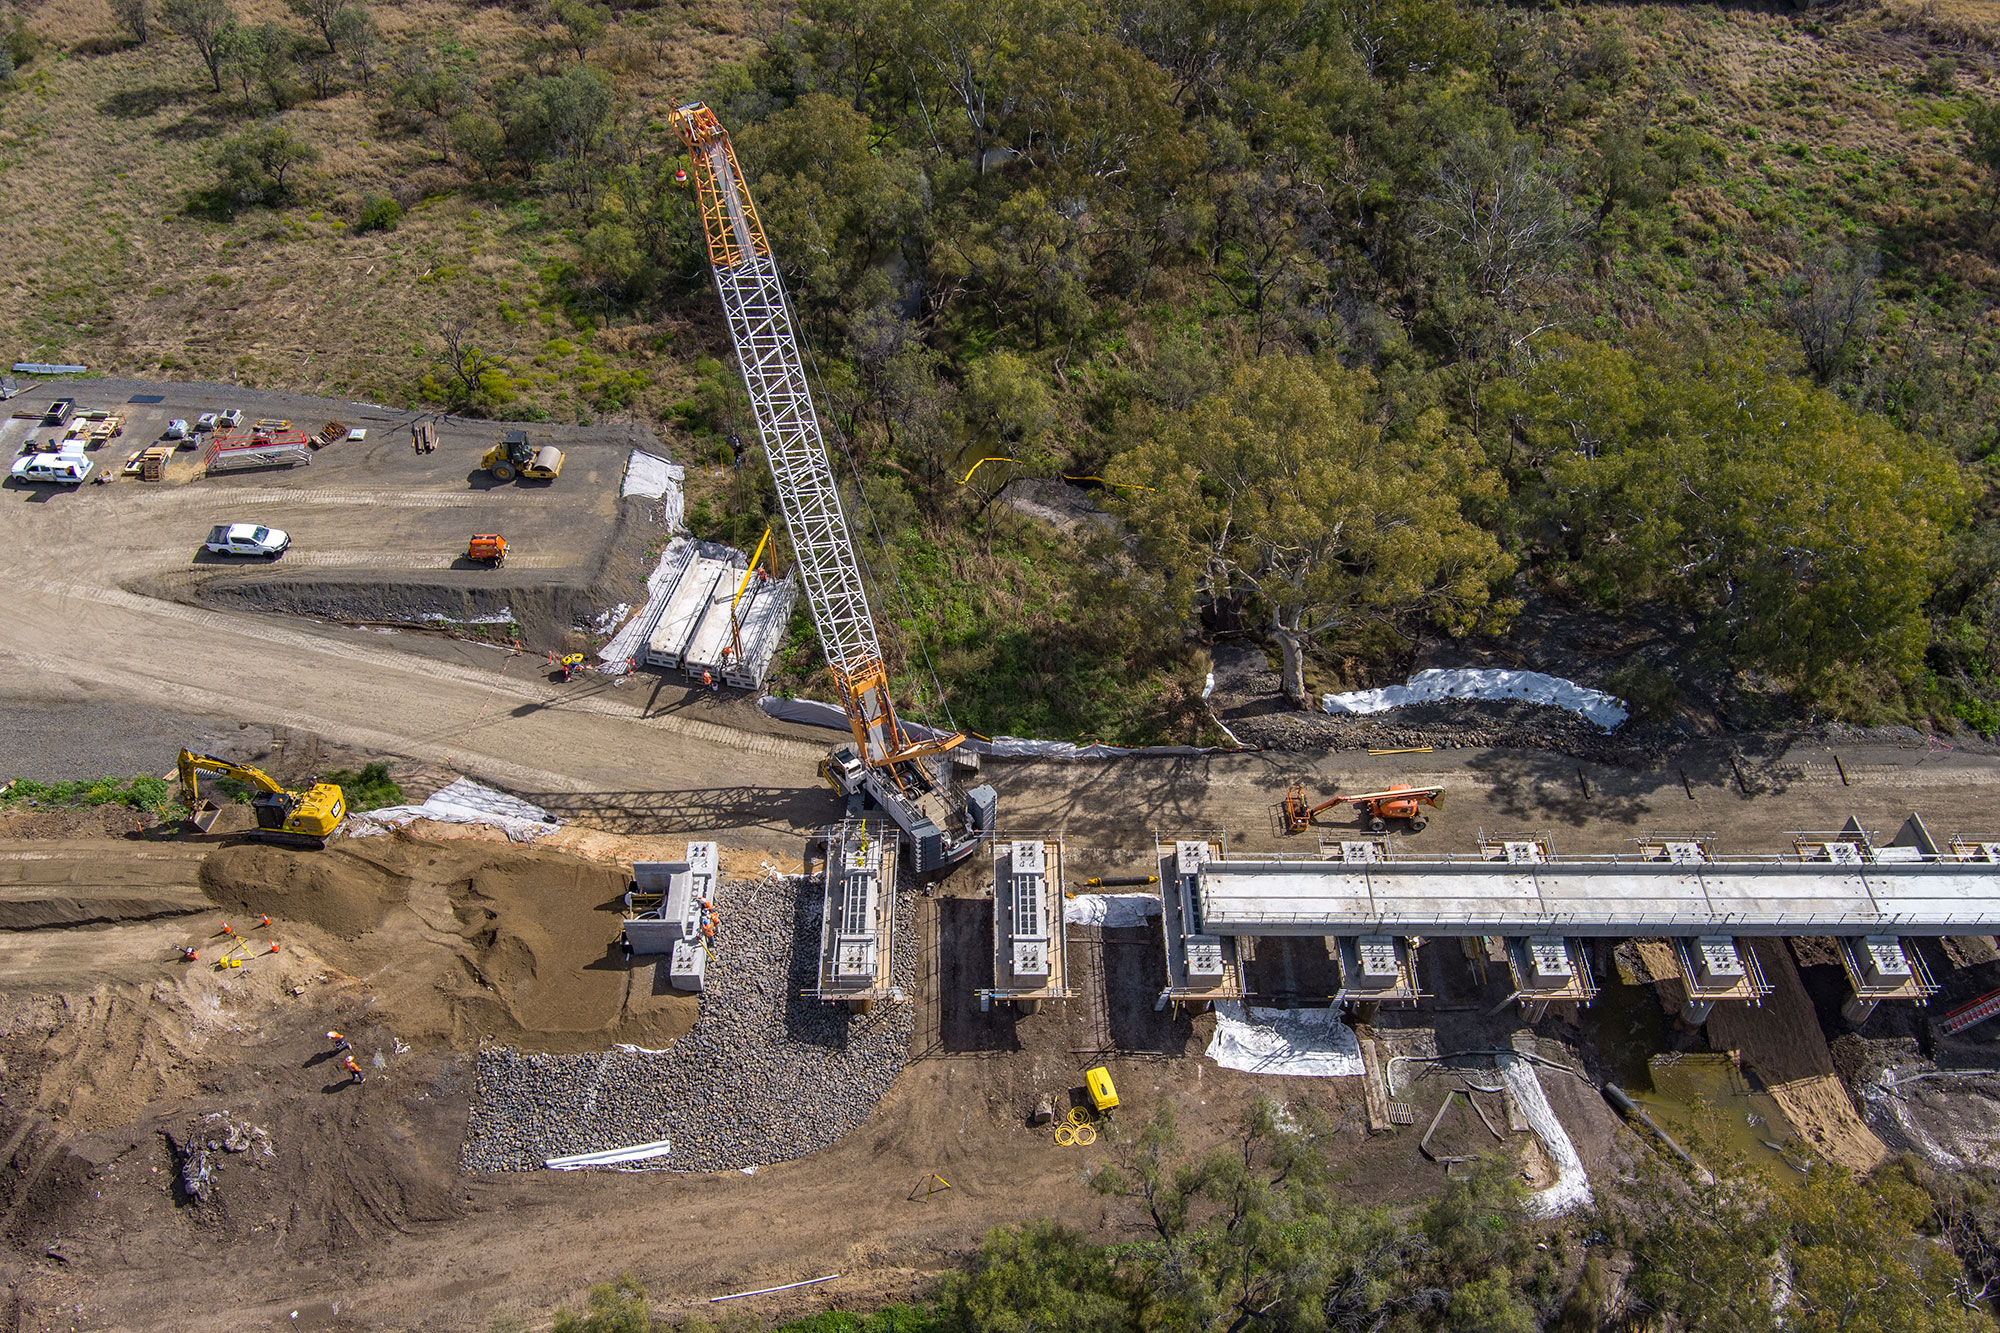 Construction works on the Narrabri to North star project